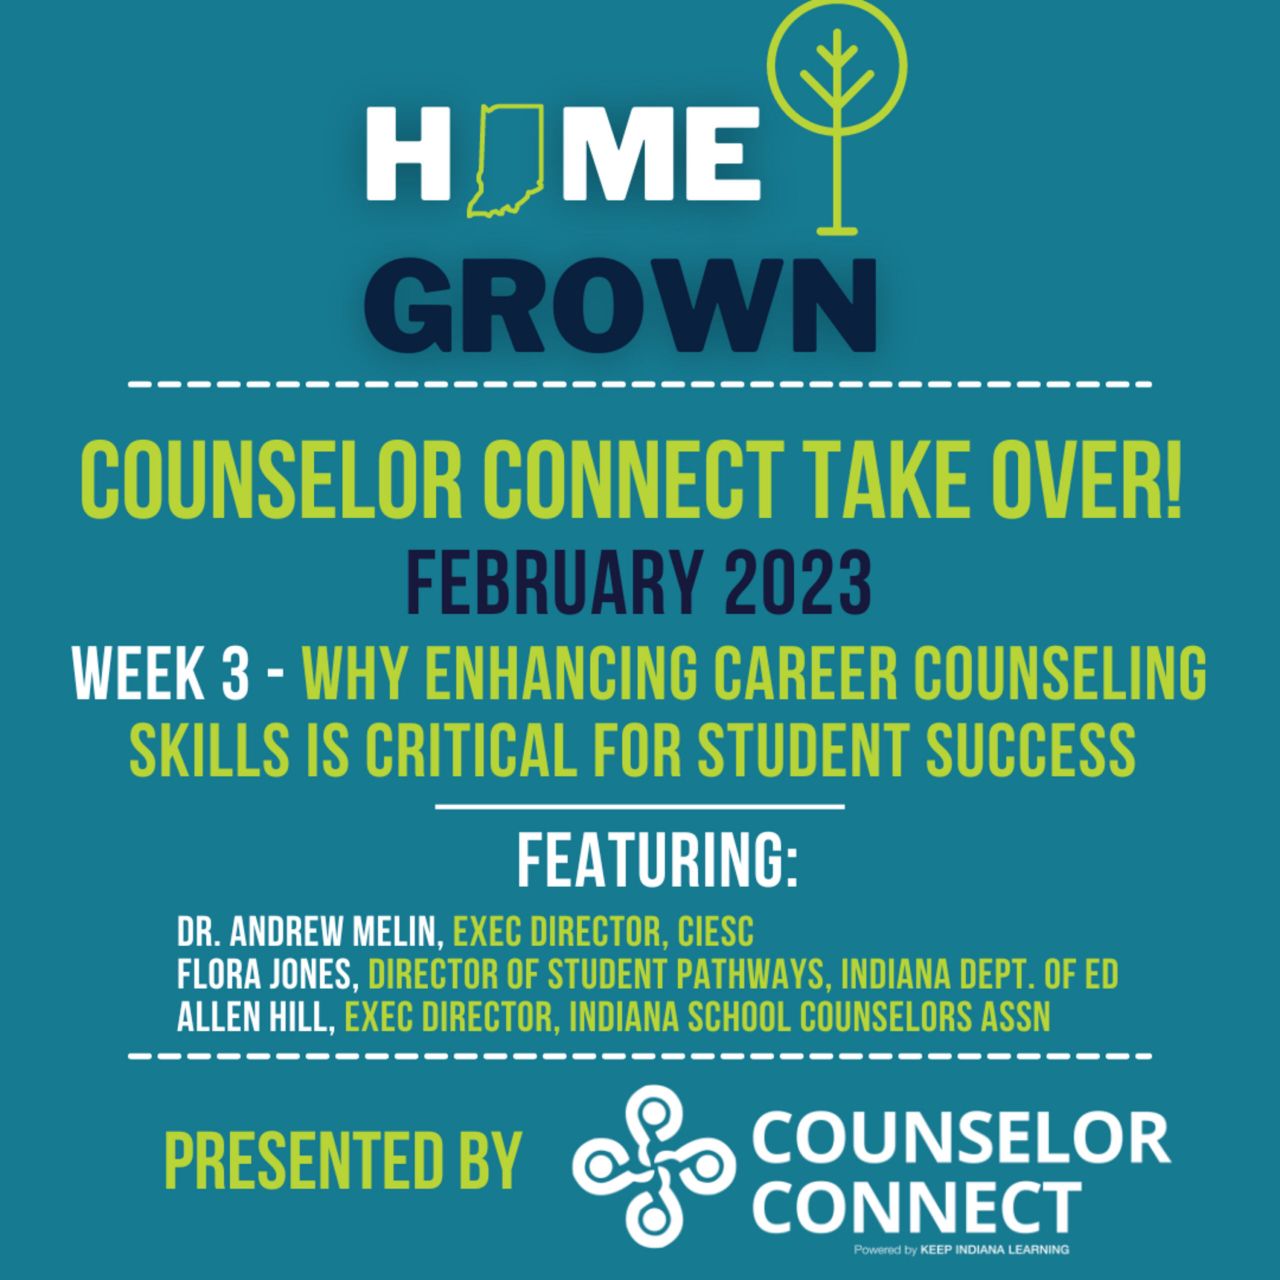 Why Enhancing Career Counseling Skills is Critical for Student Success